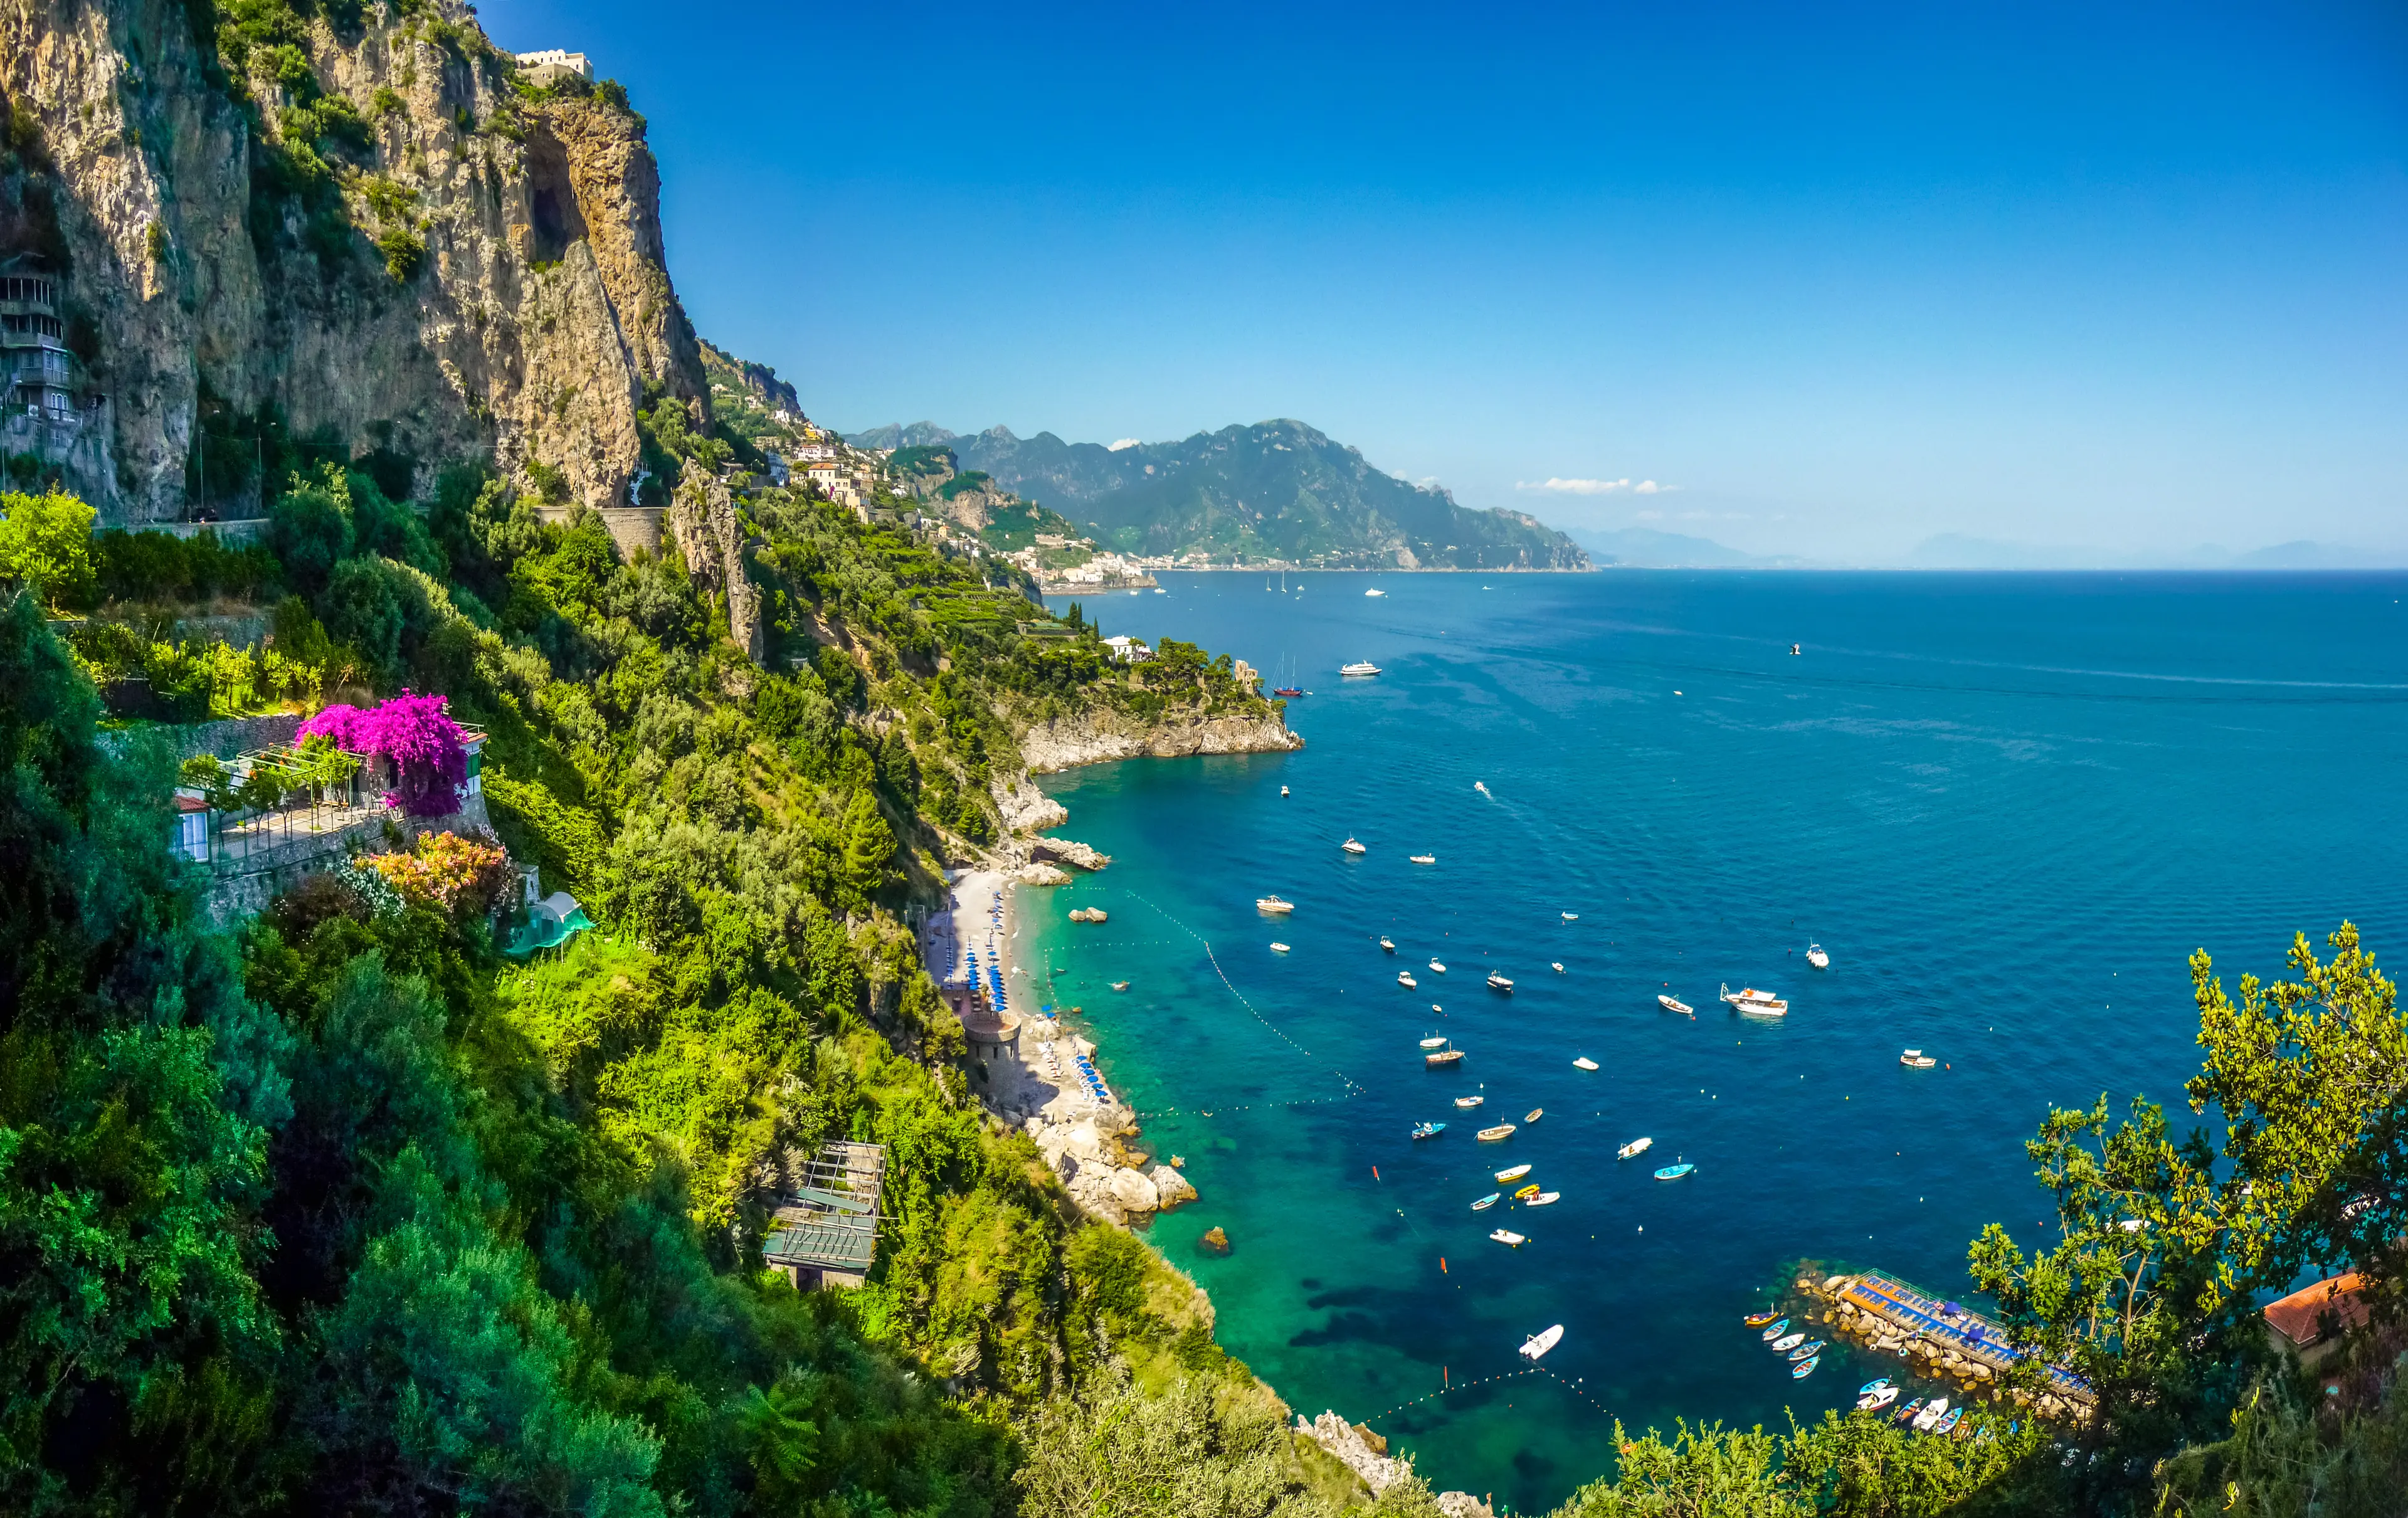 3-Day Family Relaxation and Sightseeing Adventure in Amalfi Coast